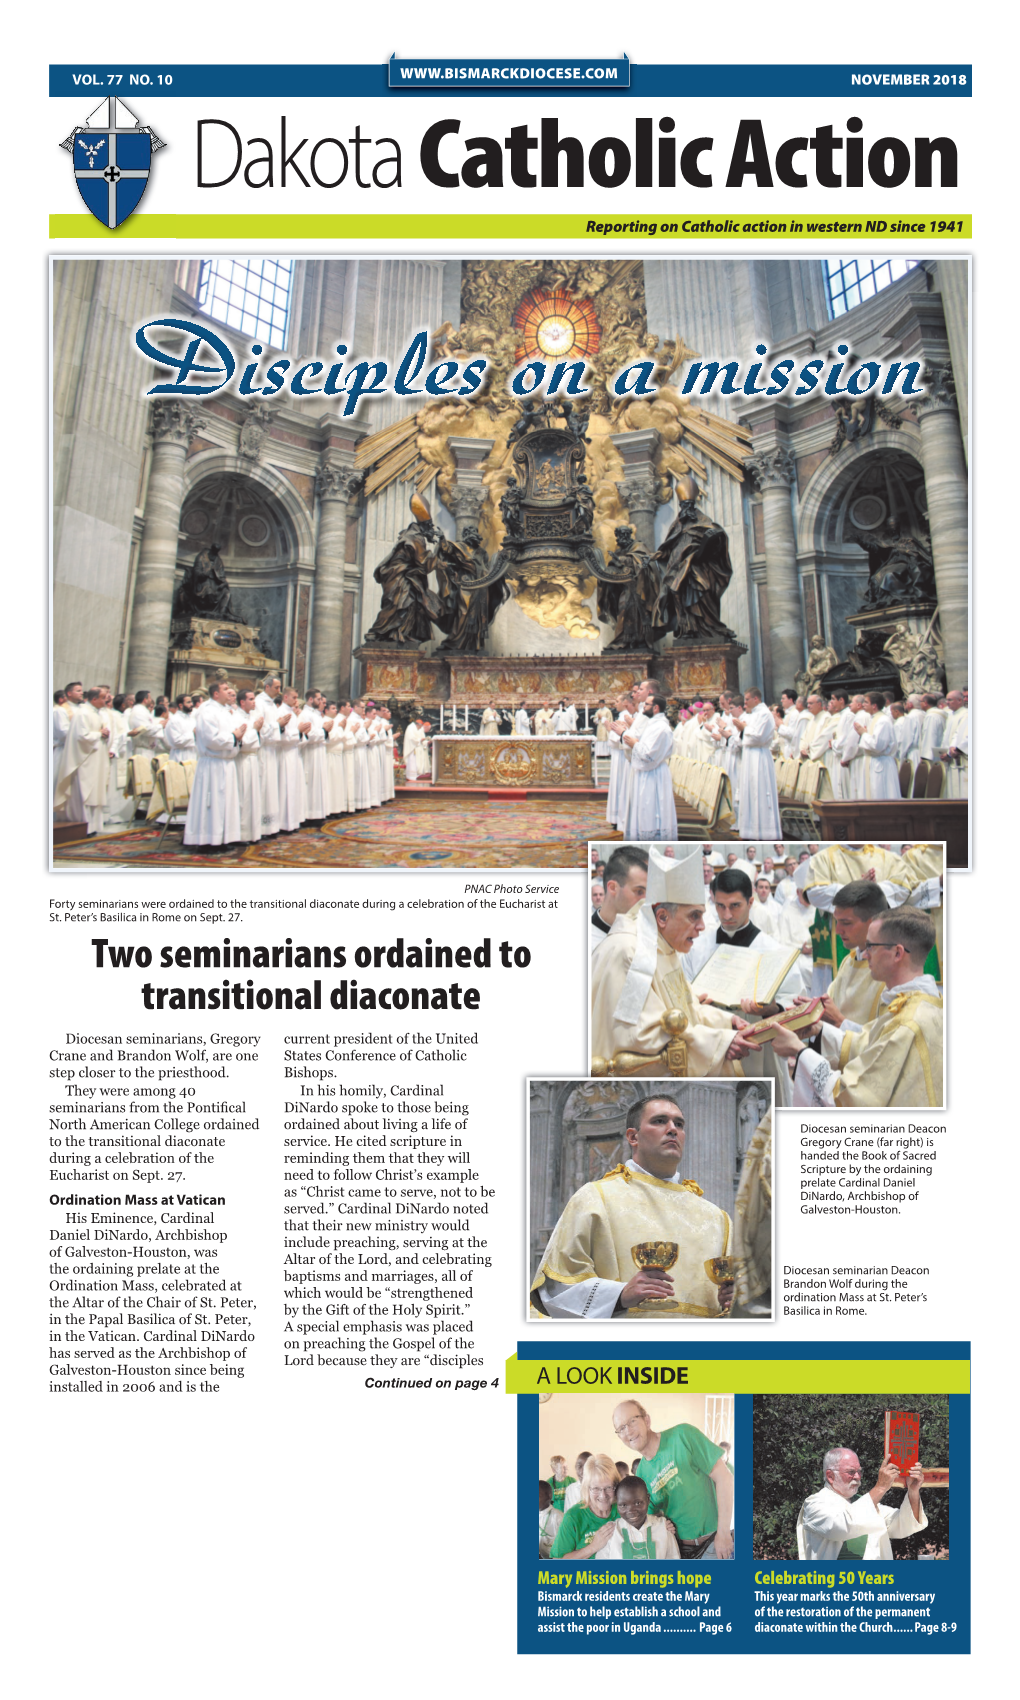 Two Seminarians Ordained to Transitional Diaconate